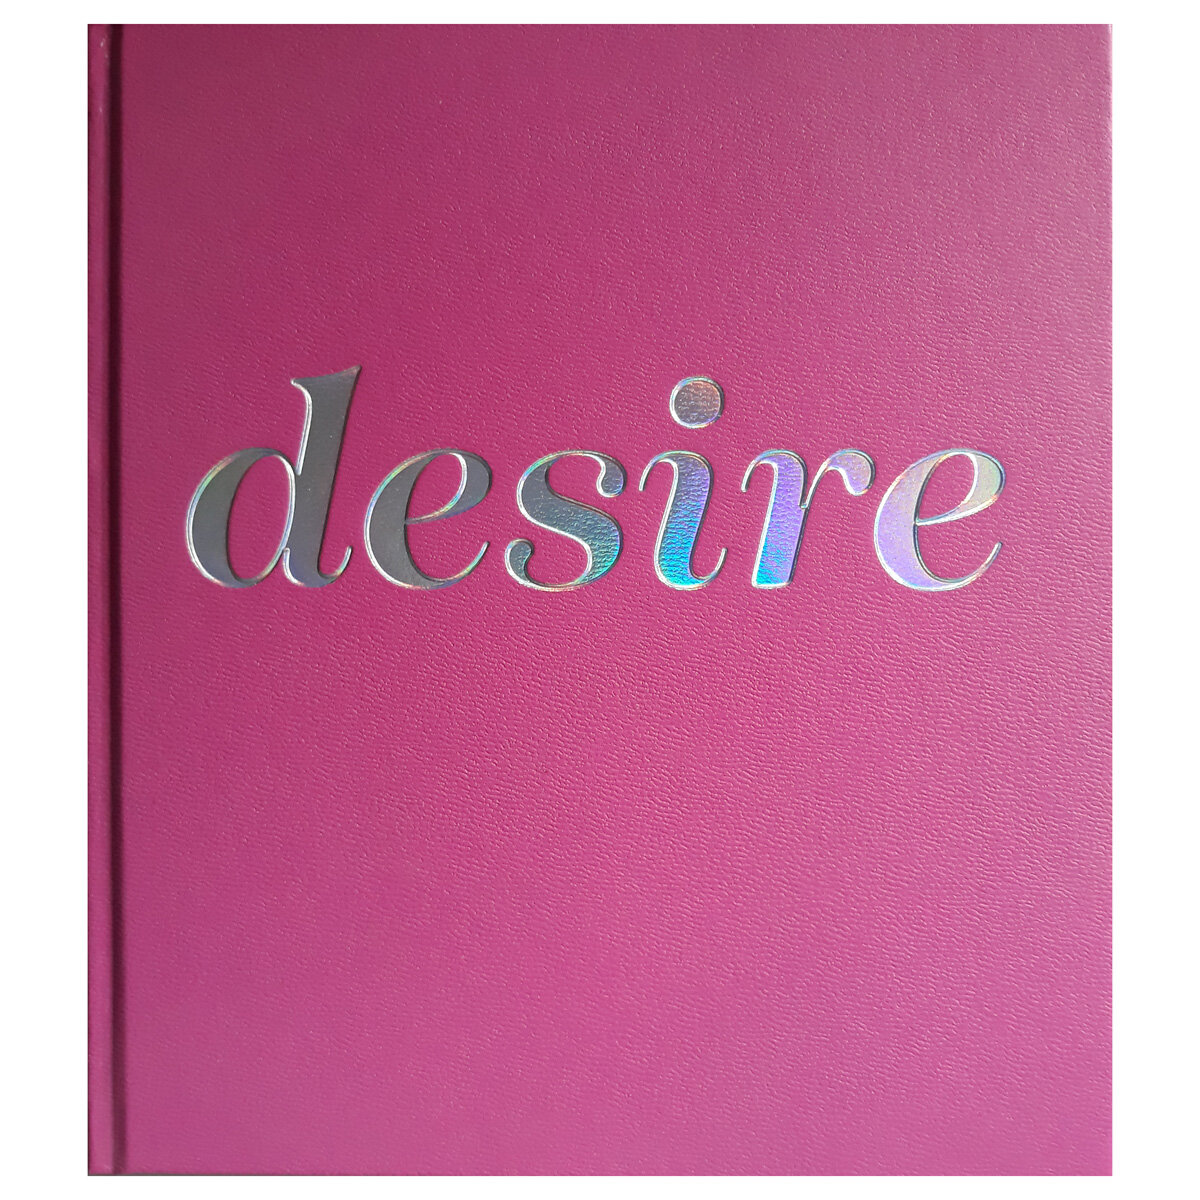 desire: 37 artists, 22 countries, 6 continents